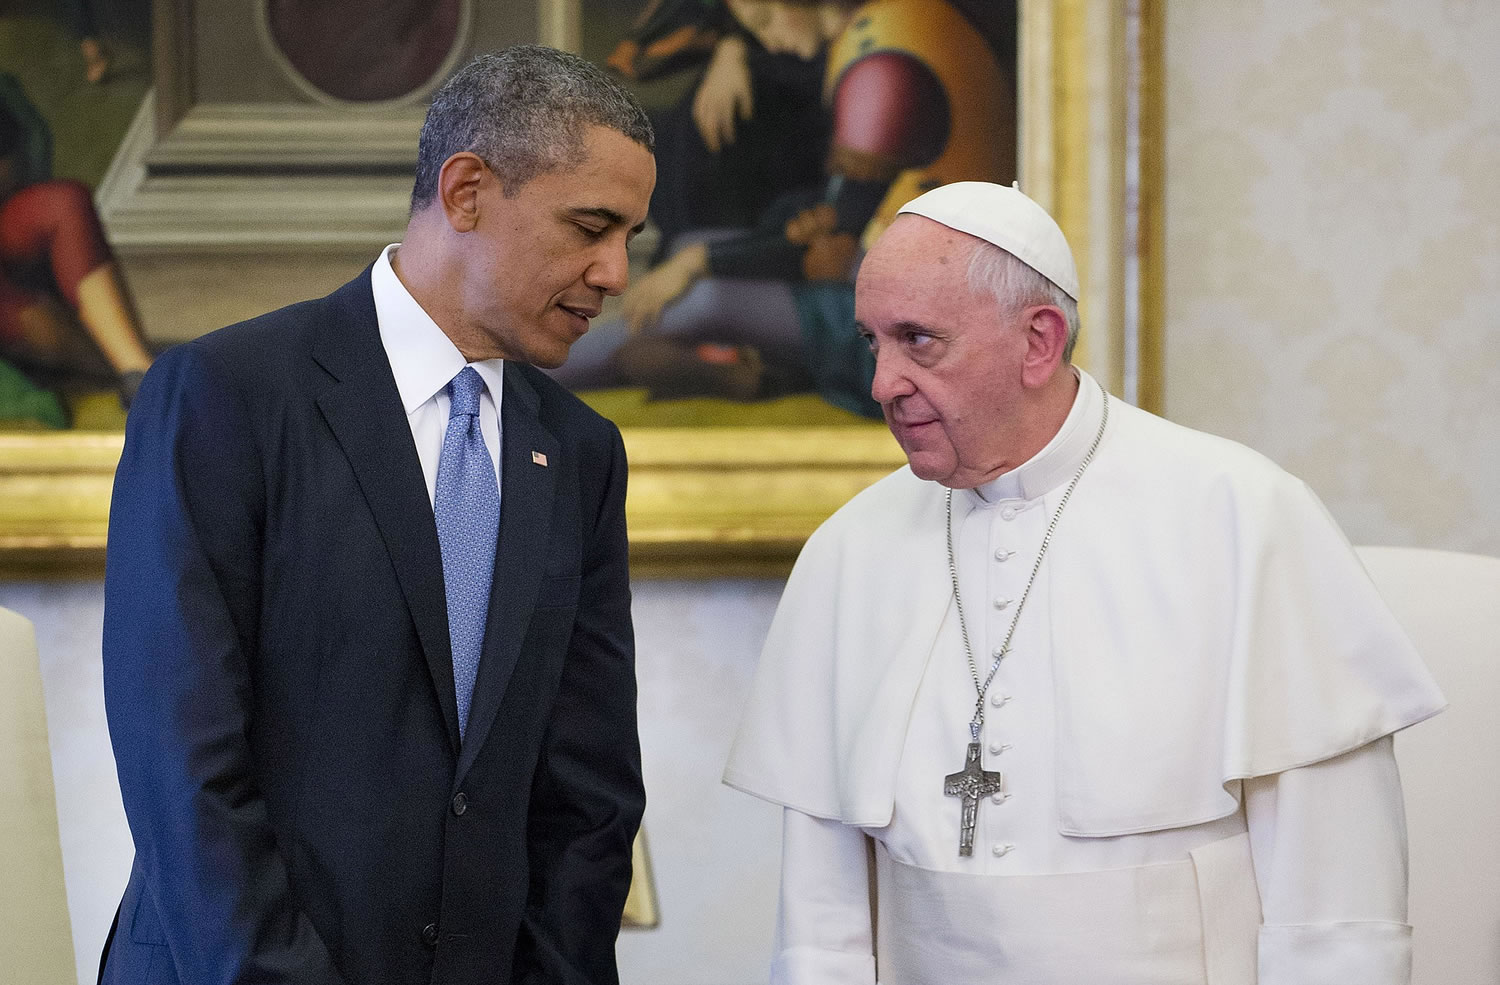 President Barack Obama meets with Pope Francis at the Vatican on March 27, 2014.